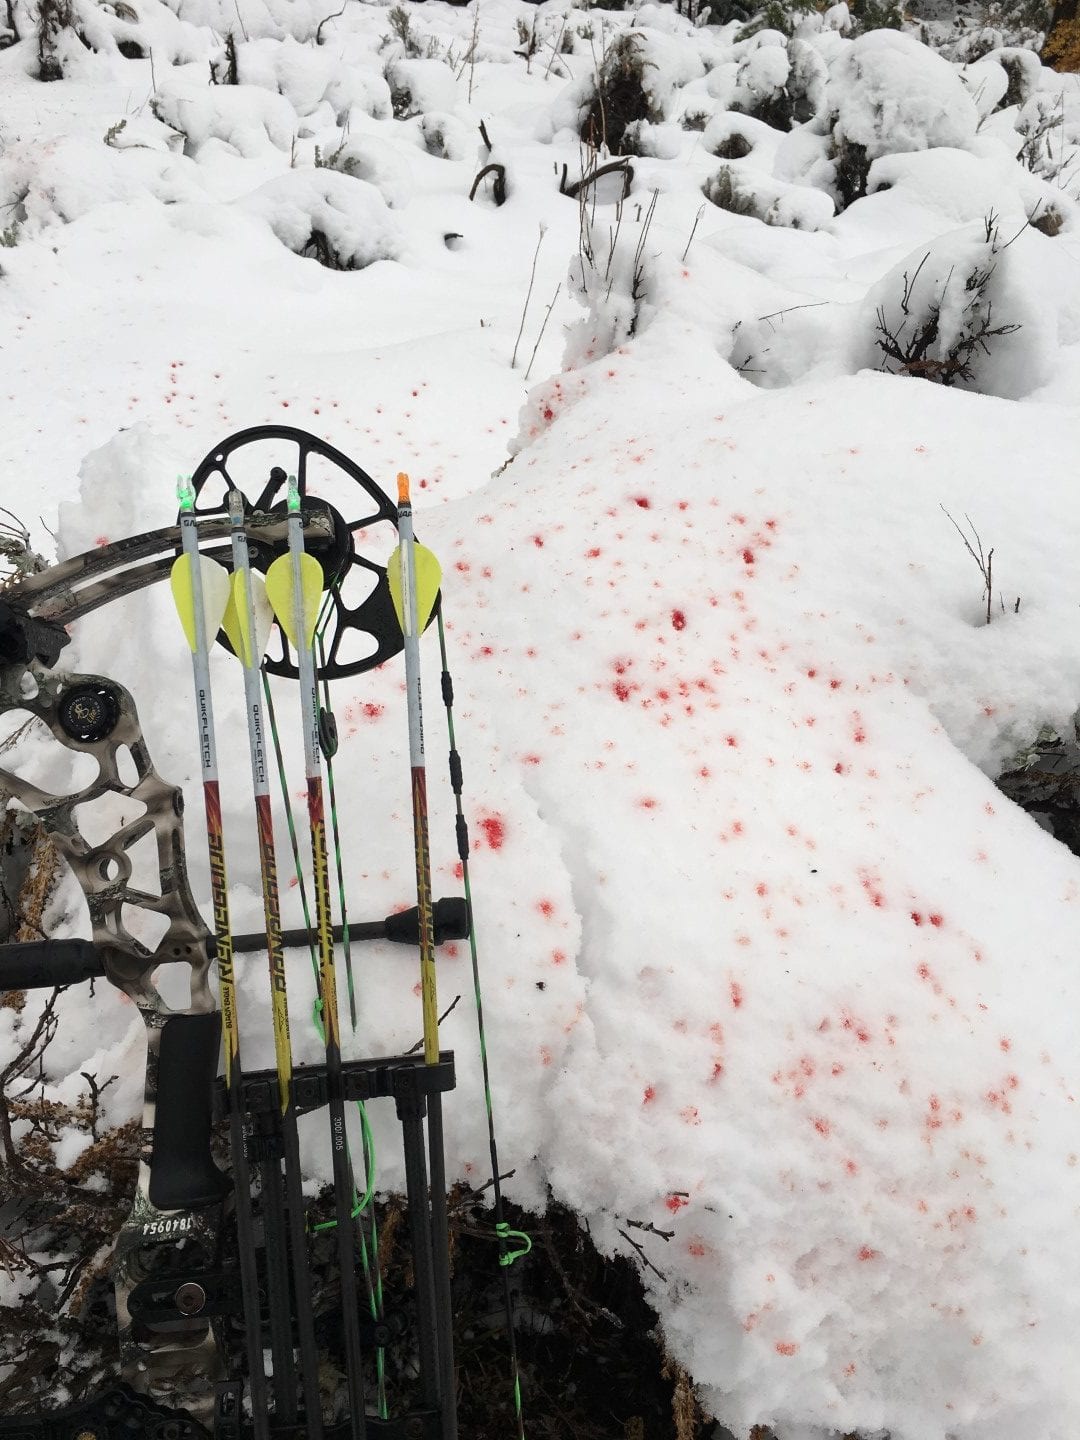 bloodtrail in the snow